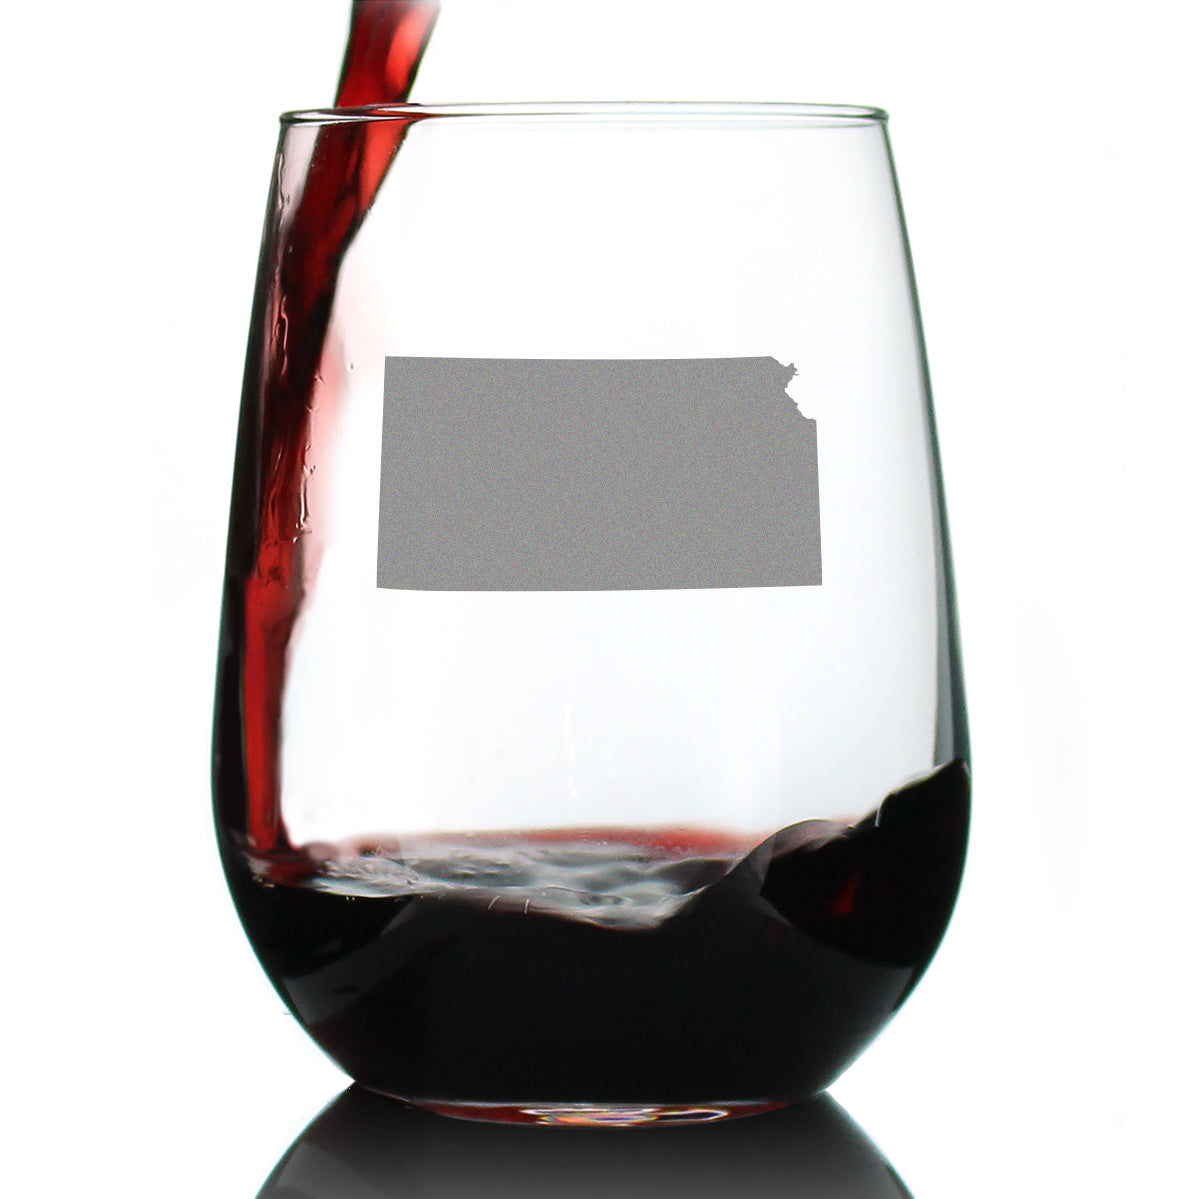 Kansas State Outline Stemless Wine Glass - State Themed Drinking Decor and Gifts for Kansan and Jayhawker Women &amp; Men - Large 17 Oz Glasses